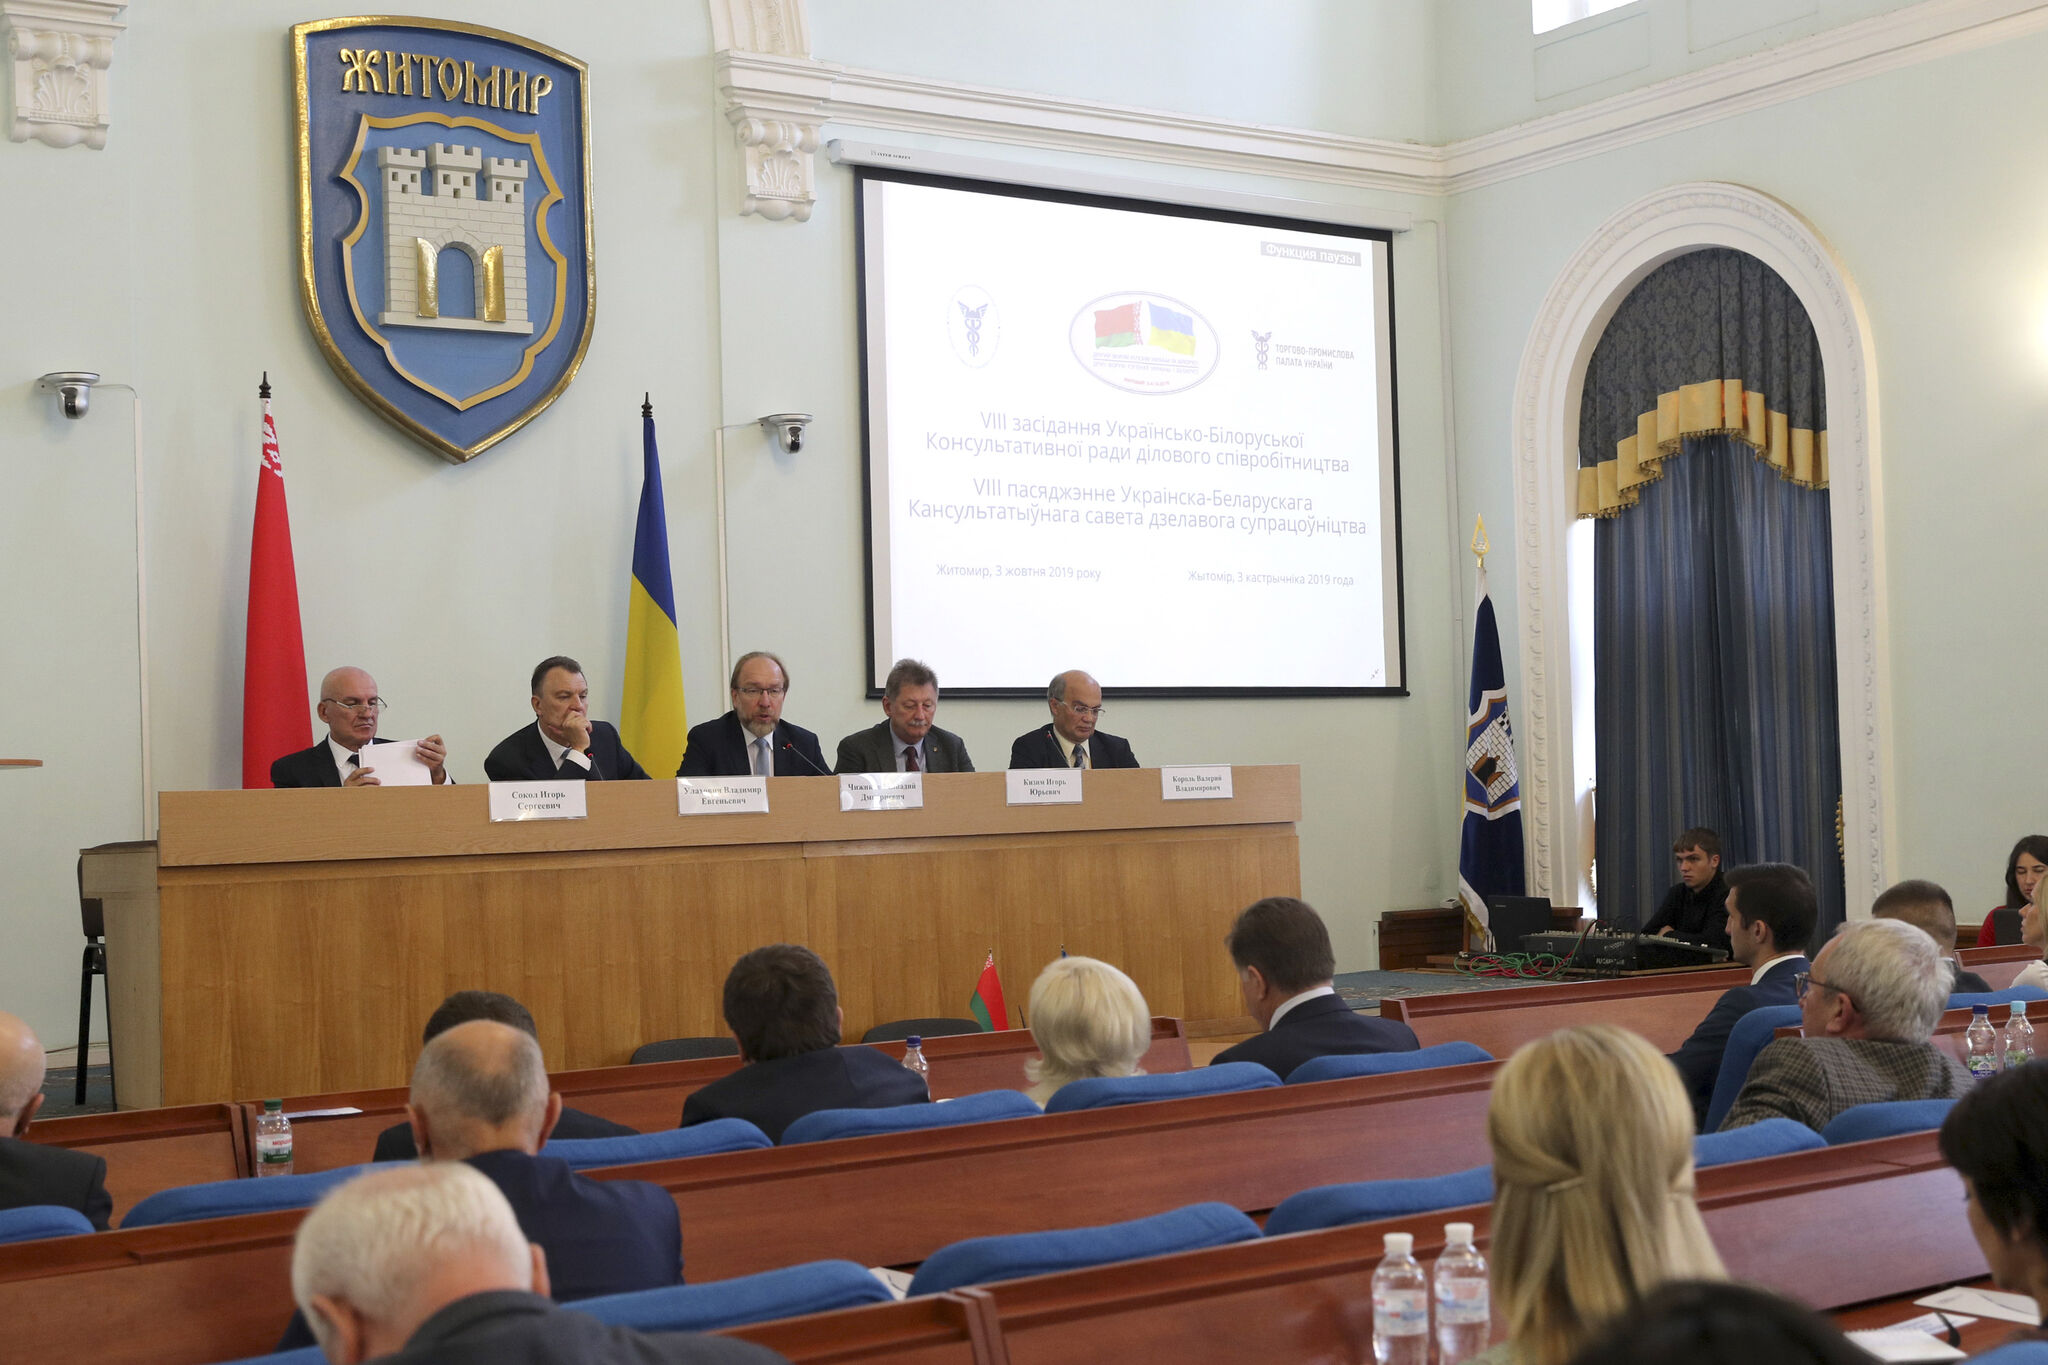 The 8th session of Ukraine-Belarus Business Cooperation Advisory Council